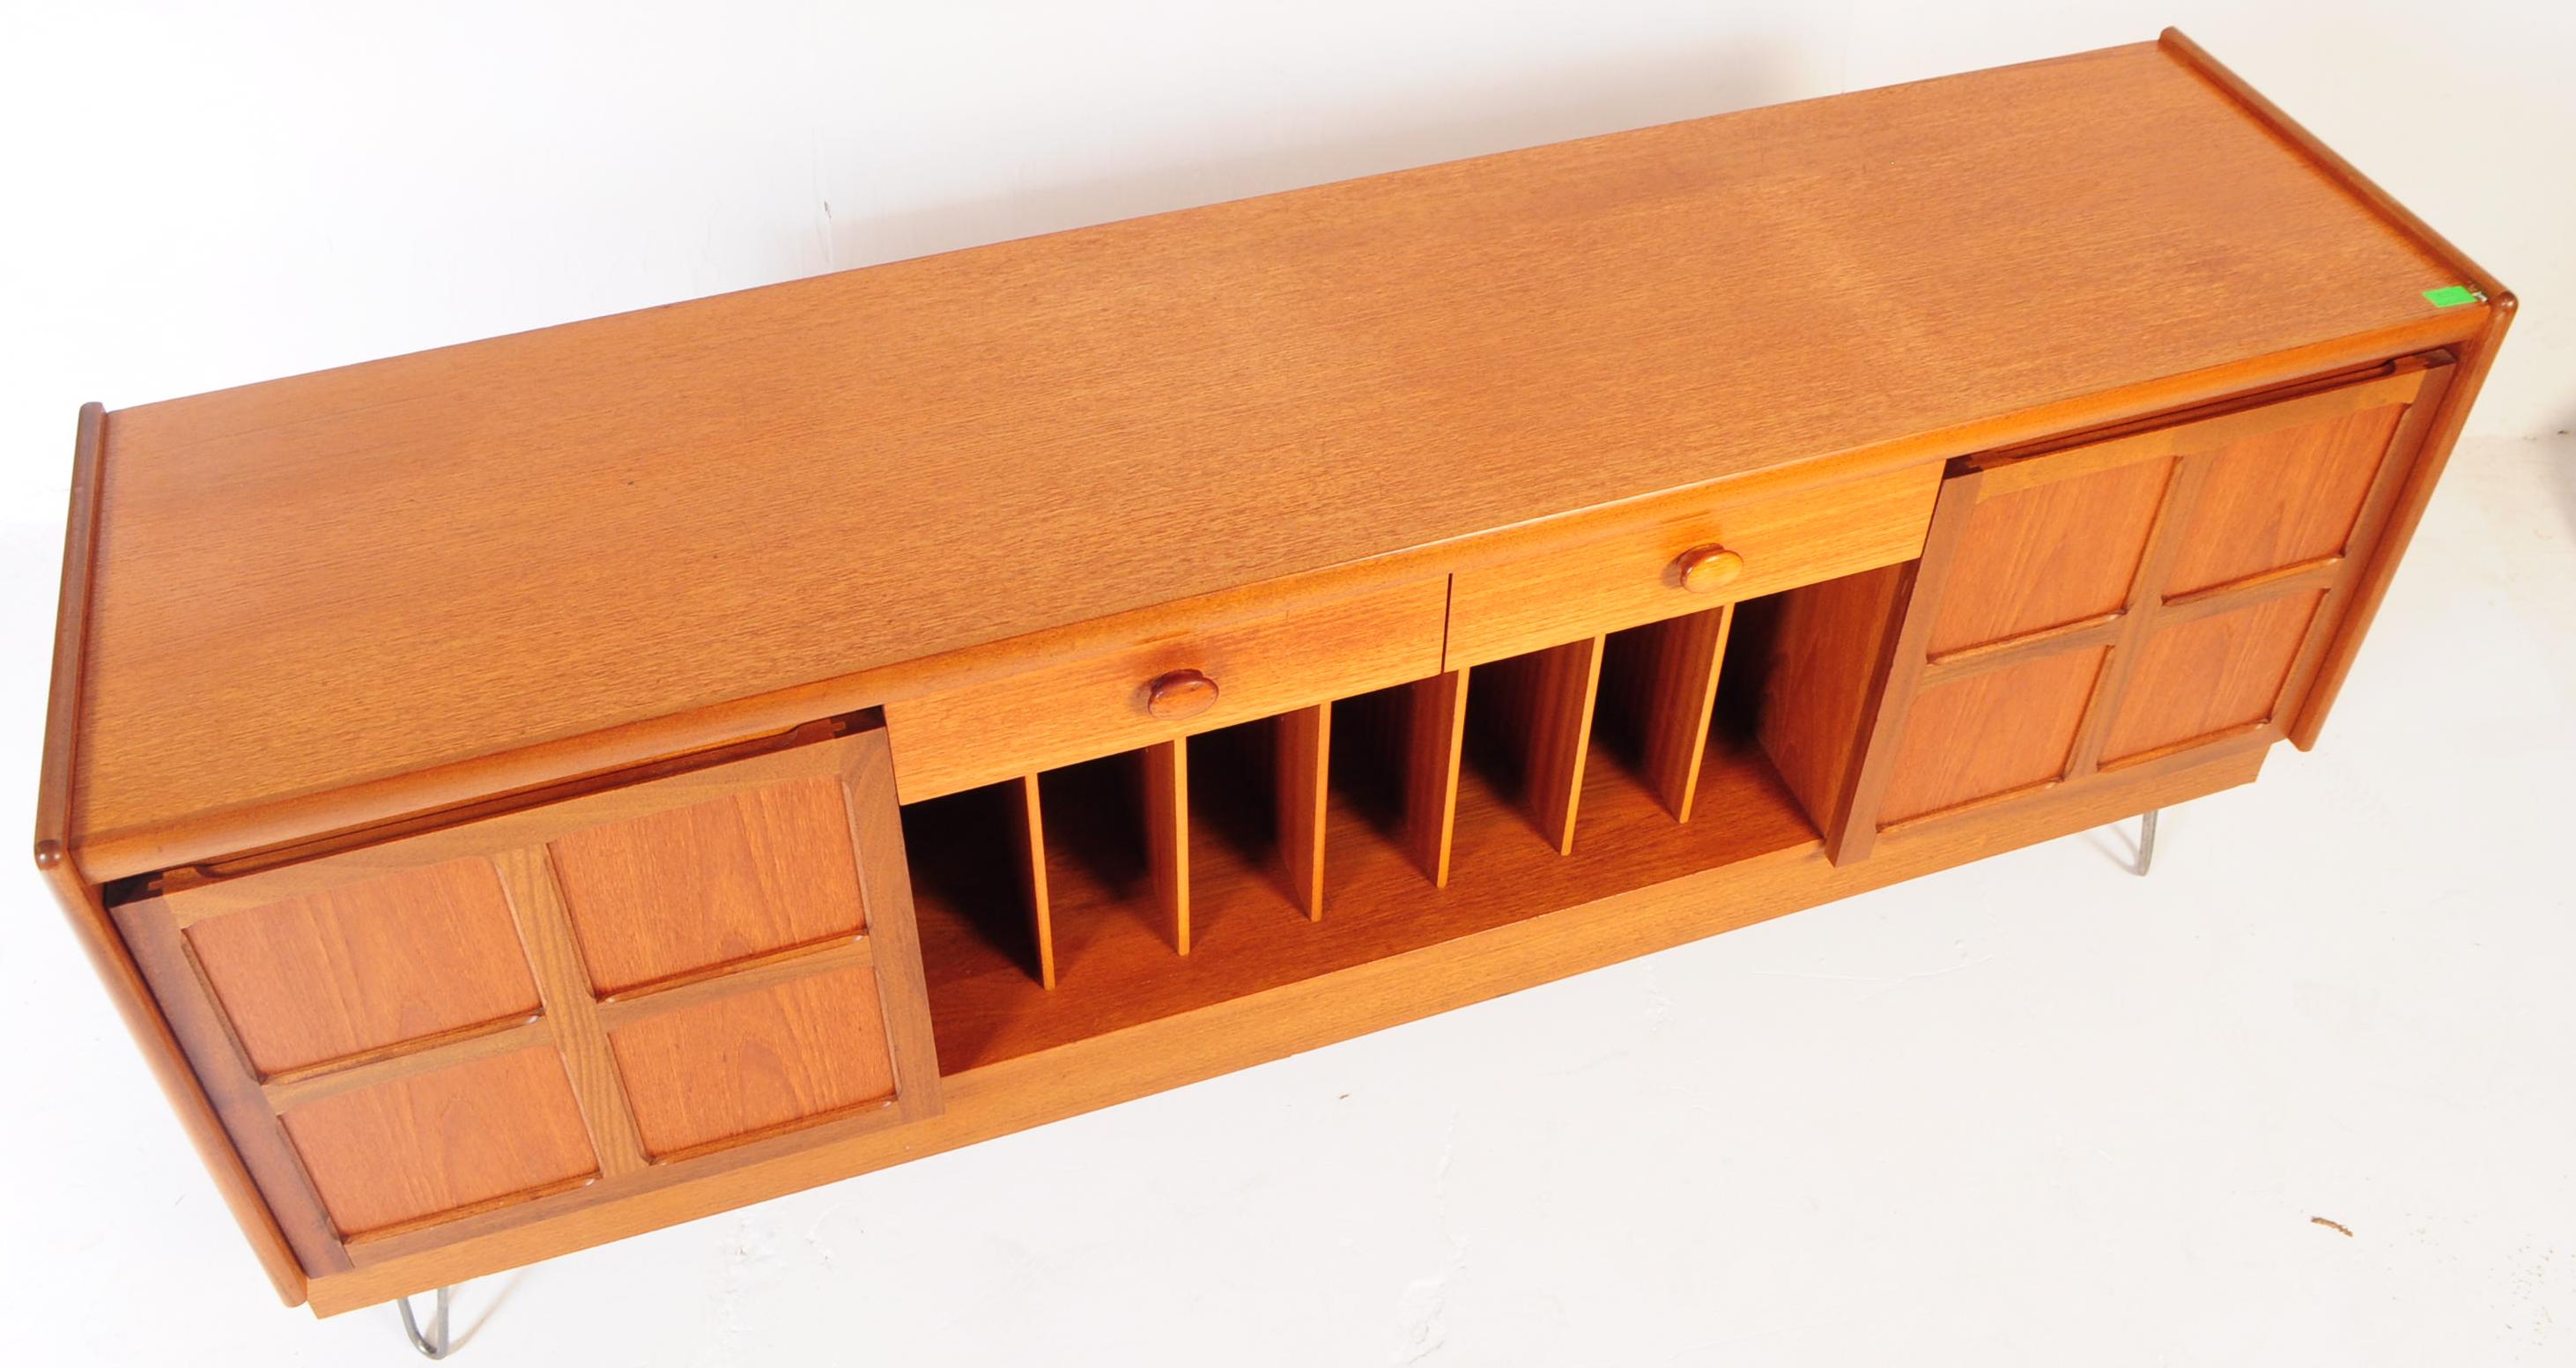 NATHAN FURNITURE - MID CENTURY TEAK SIDEBOARD WITH HAIRPINS - Image 2 of 5